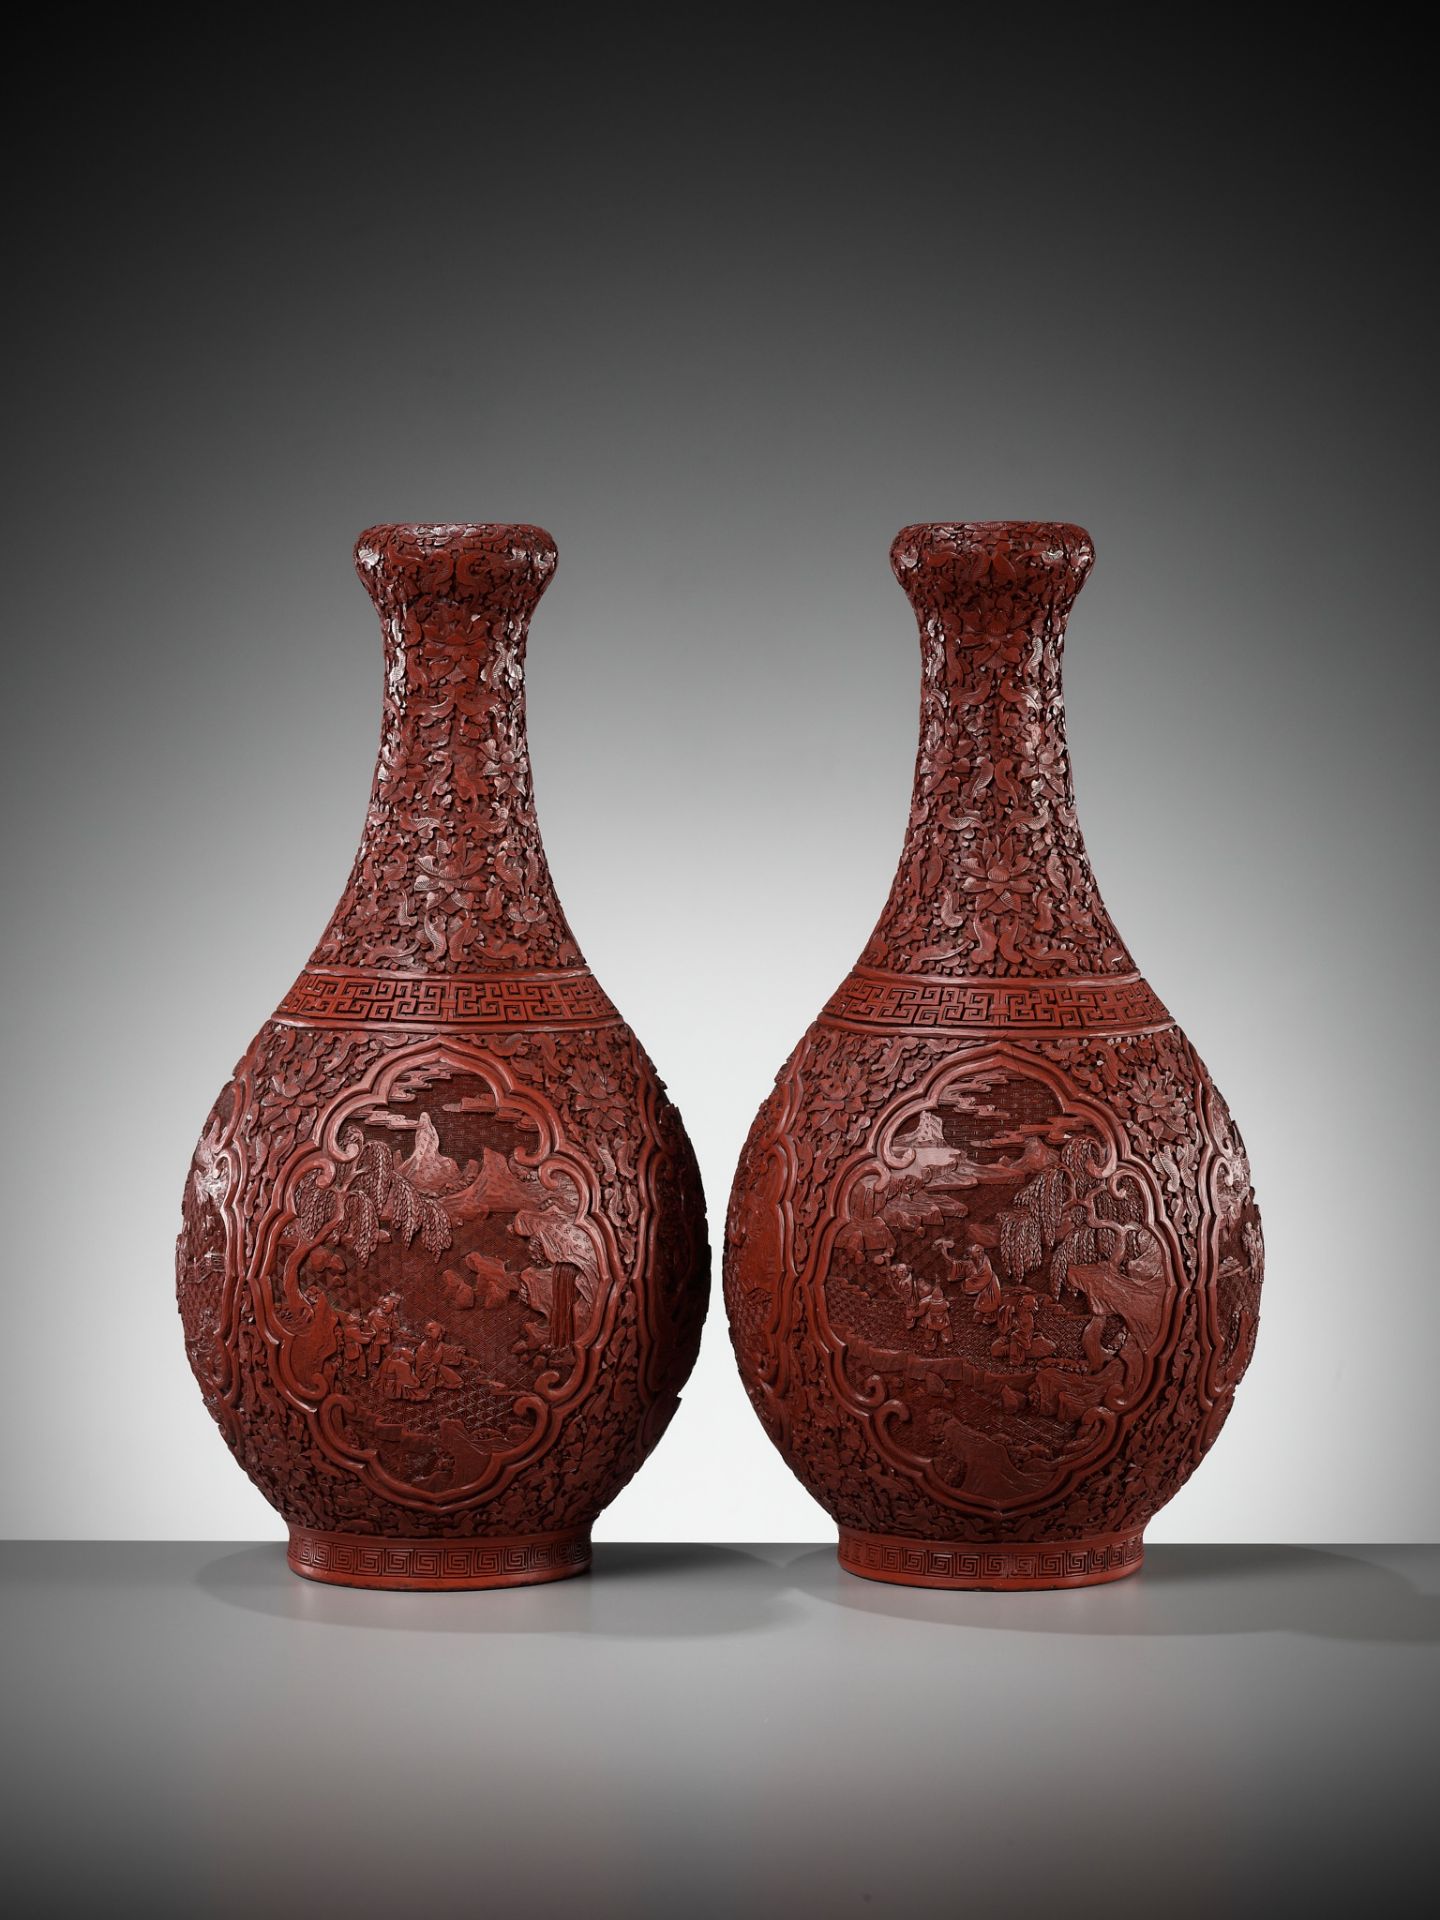 A PAIR OF LARGE CINNABAR LACQUER GARLIC HEAD VASES, CHINA, 1800-1850 - Image 8 of 14